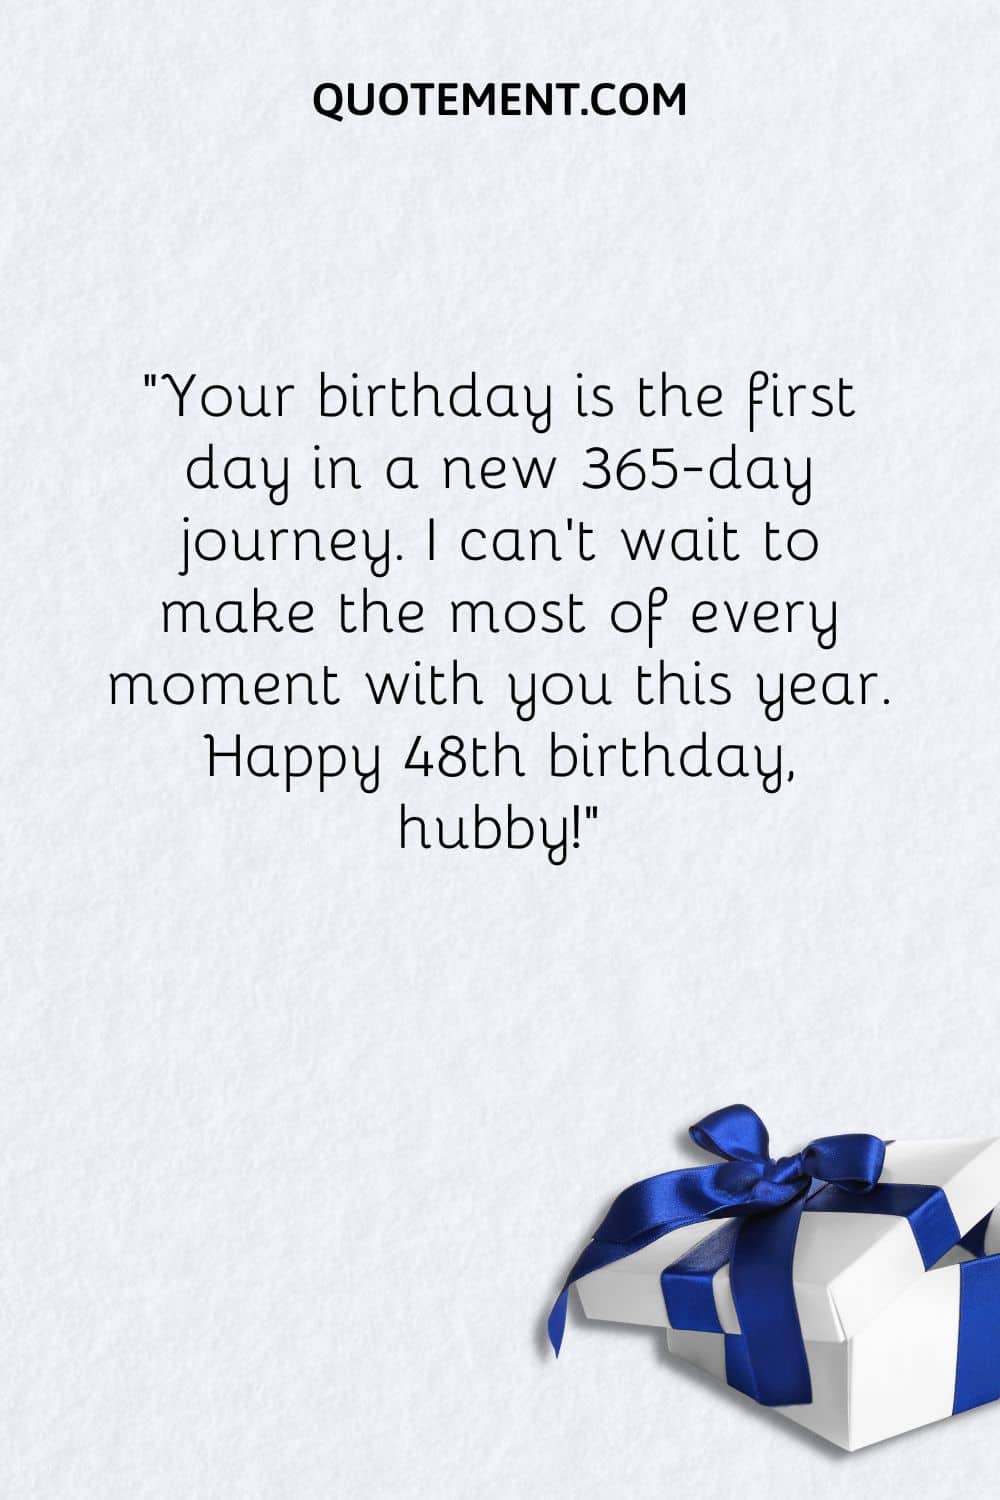 Your birthday is the first day in a new 365-day journey